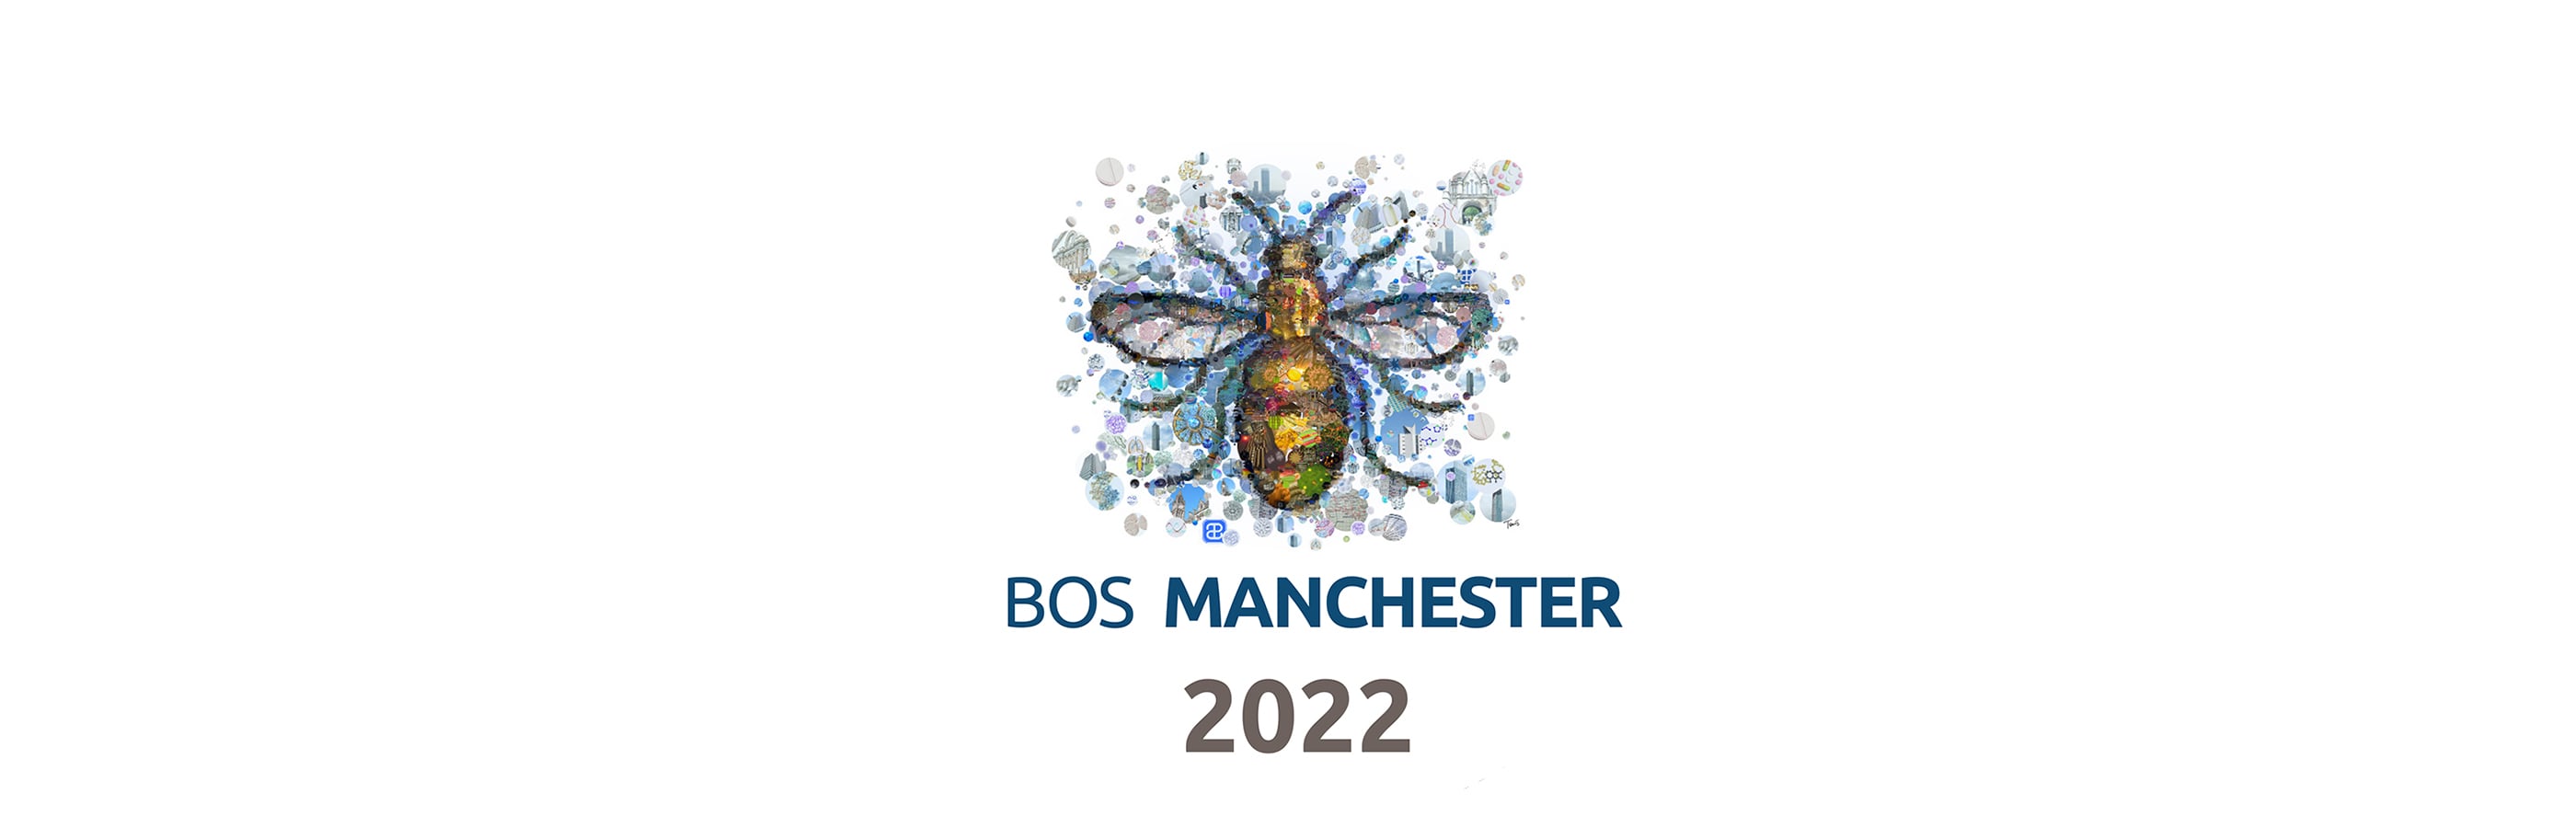 BOS Manchester 2022